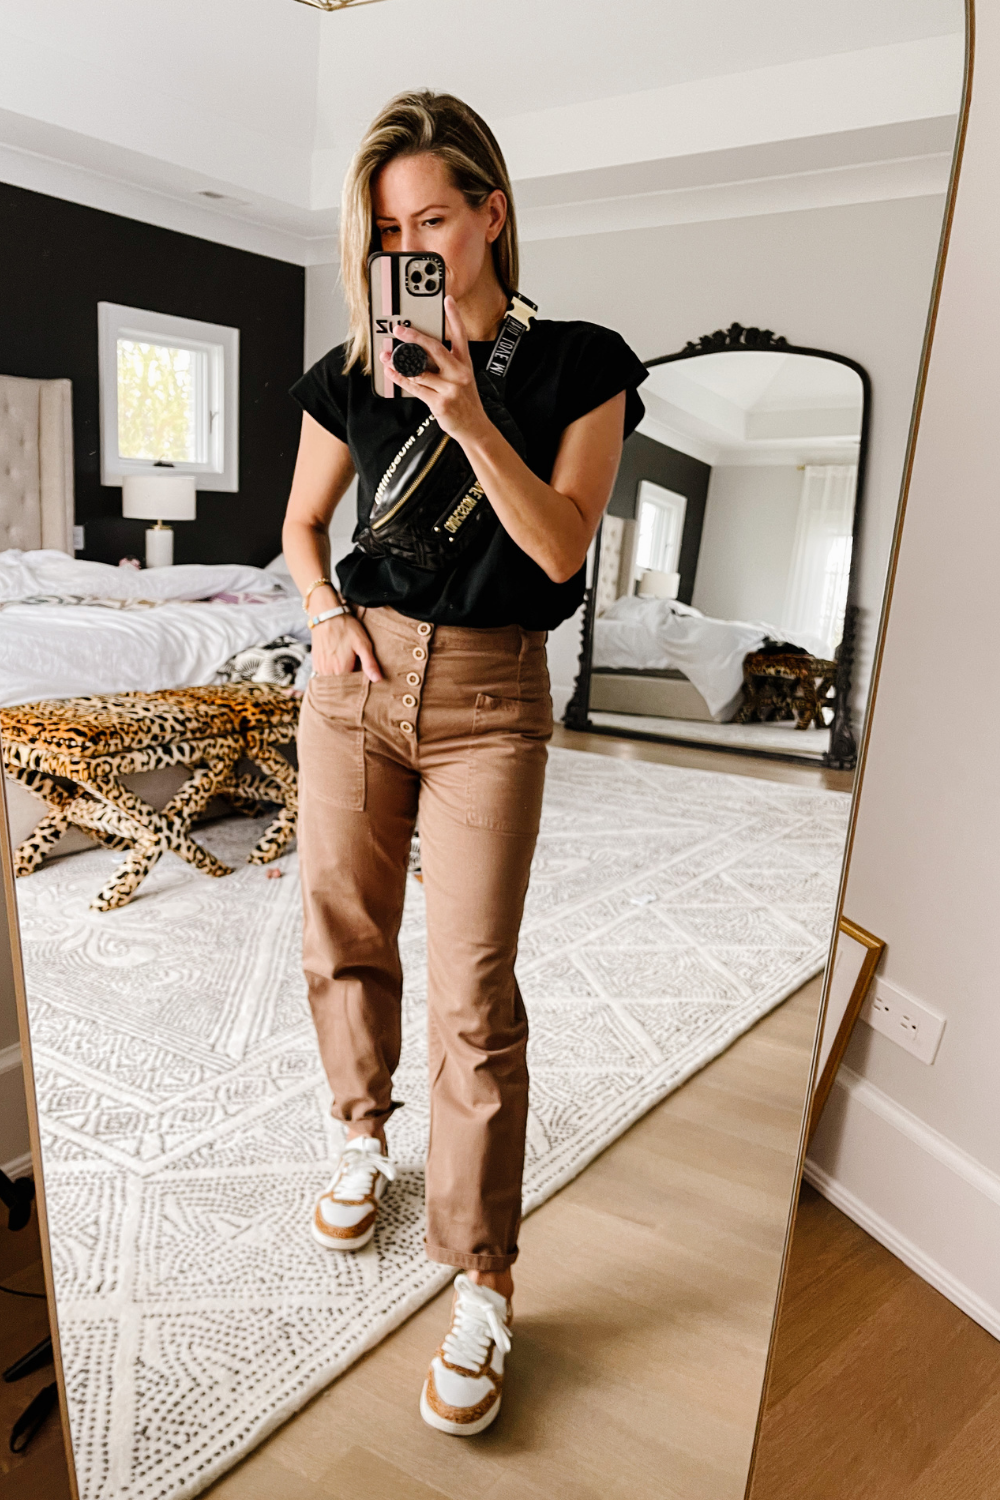 Suzanne wearing Pistola trousers and sneakers